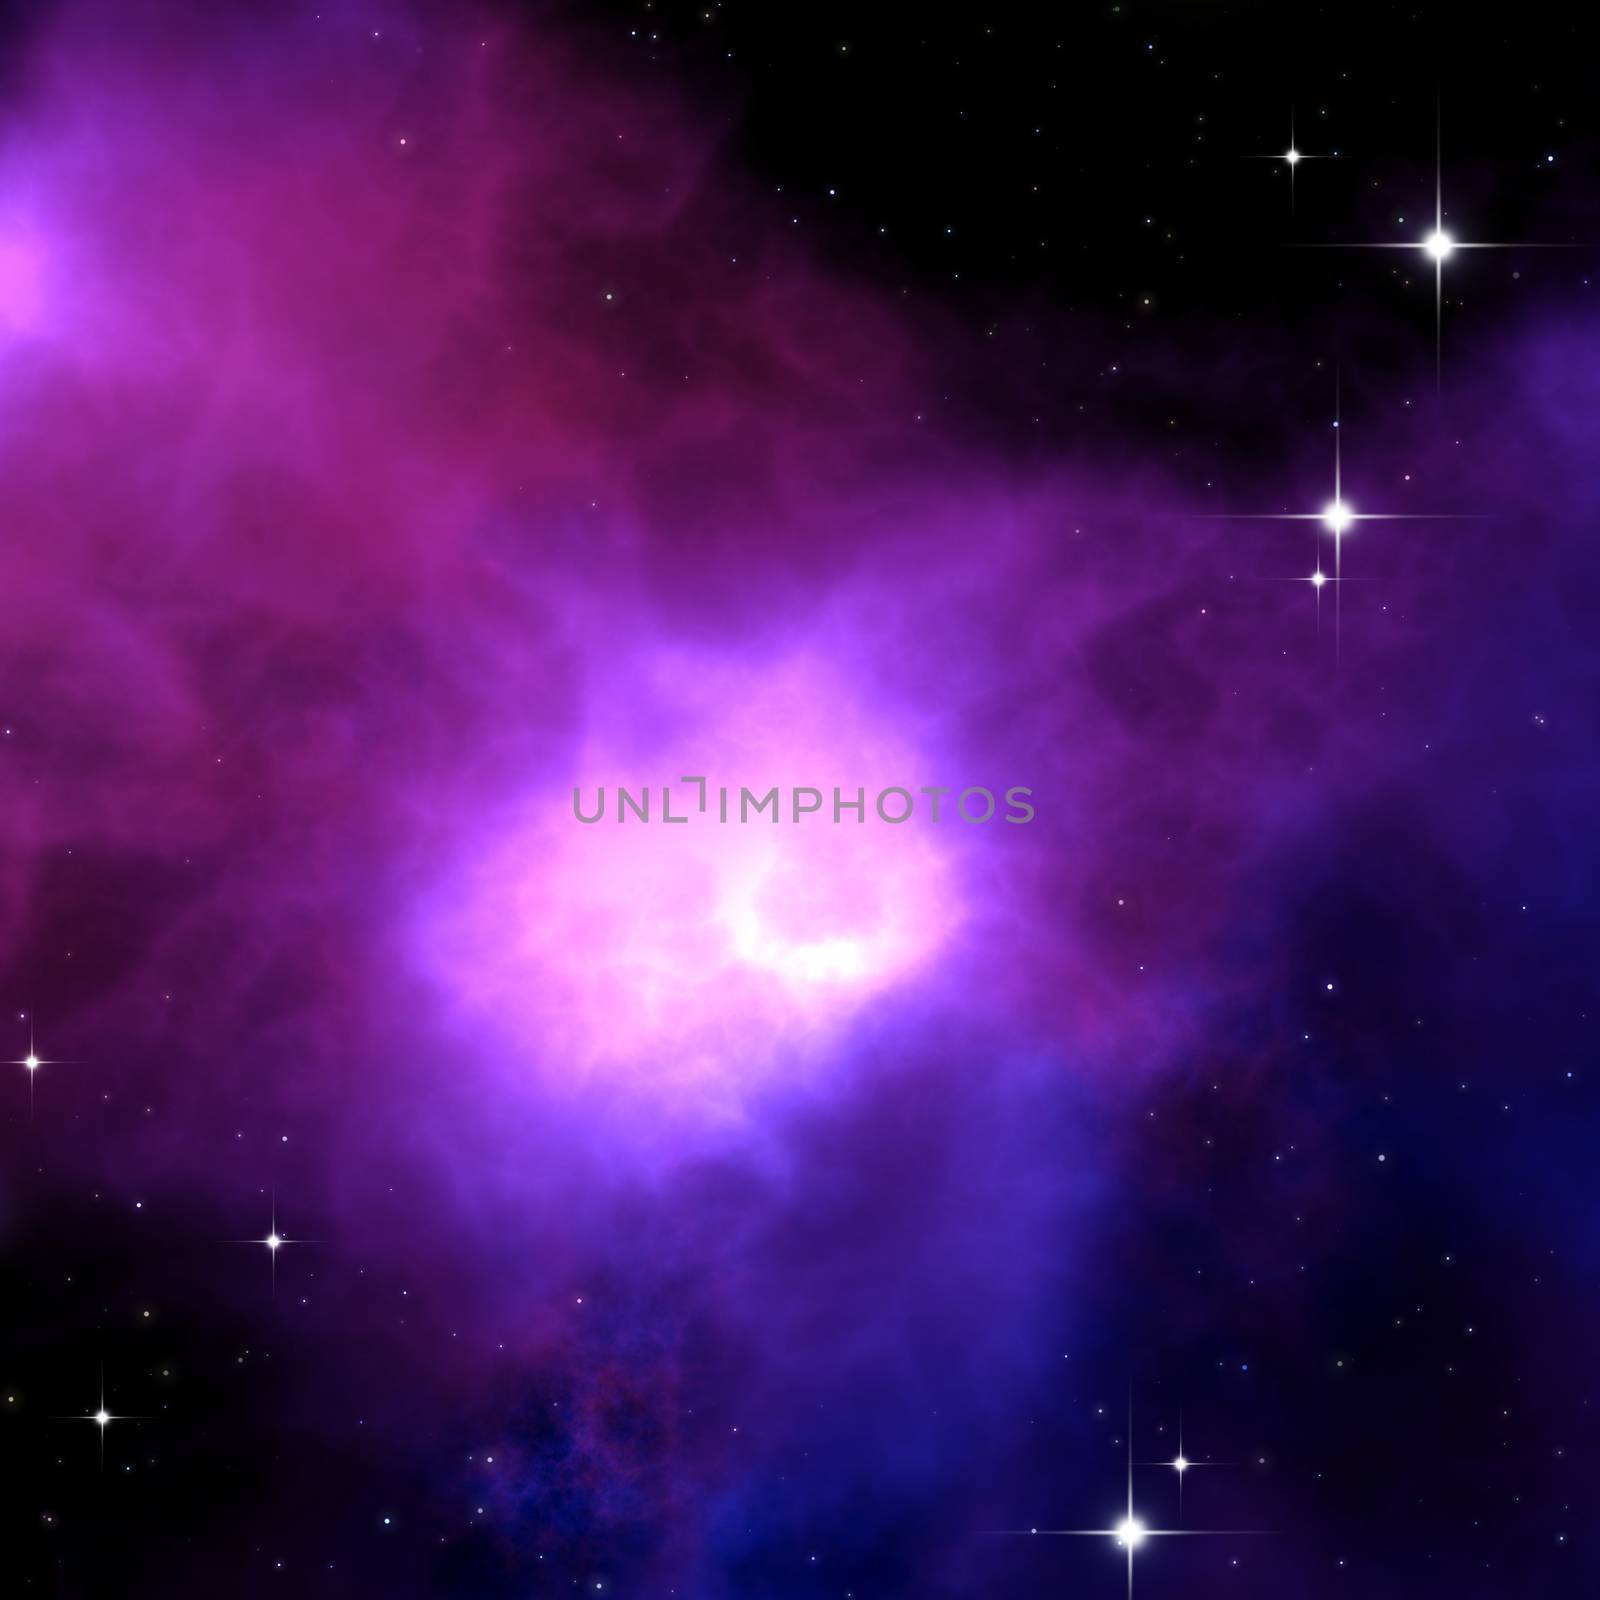 An image of a strange purple nebula in space